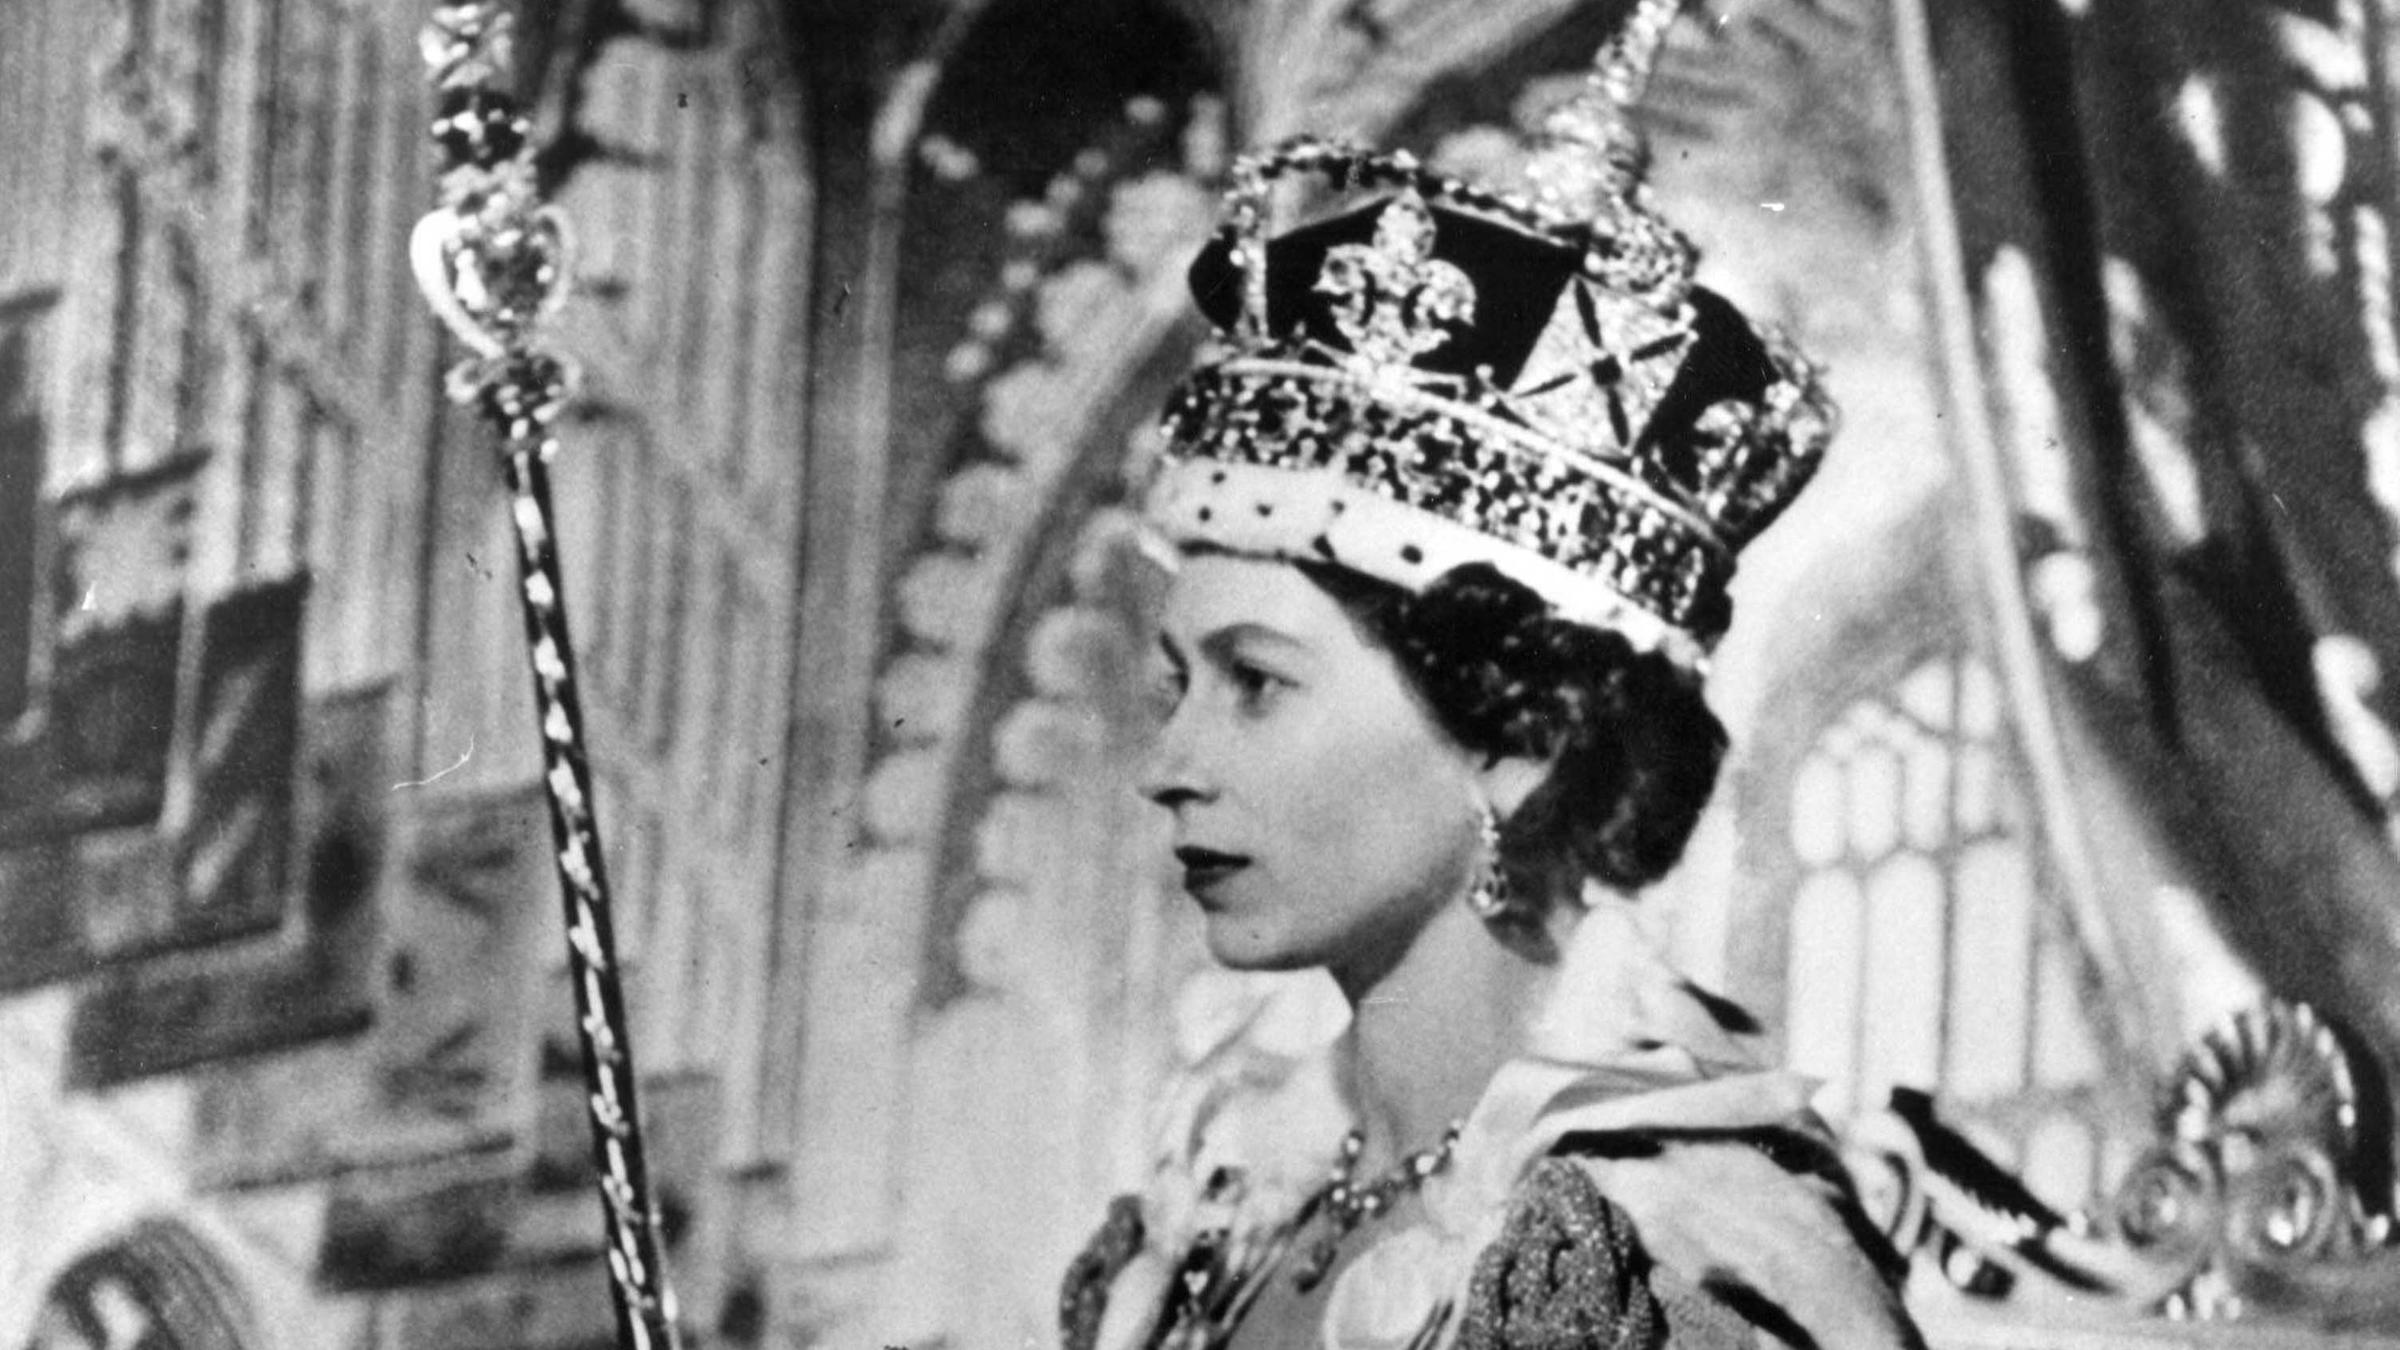 QUEEN ELIZABETH II has been crowned at a coronation ceremony in Westminster Abbey in London